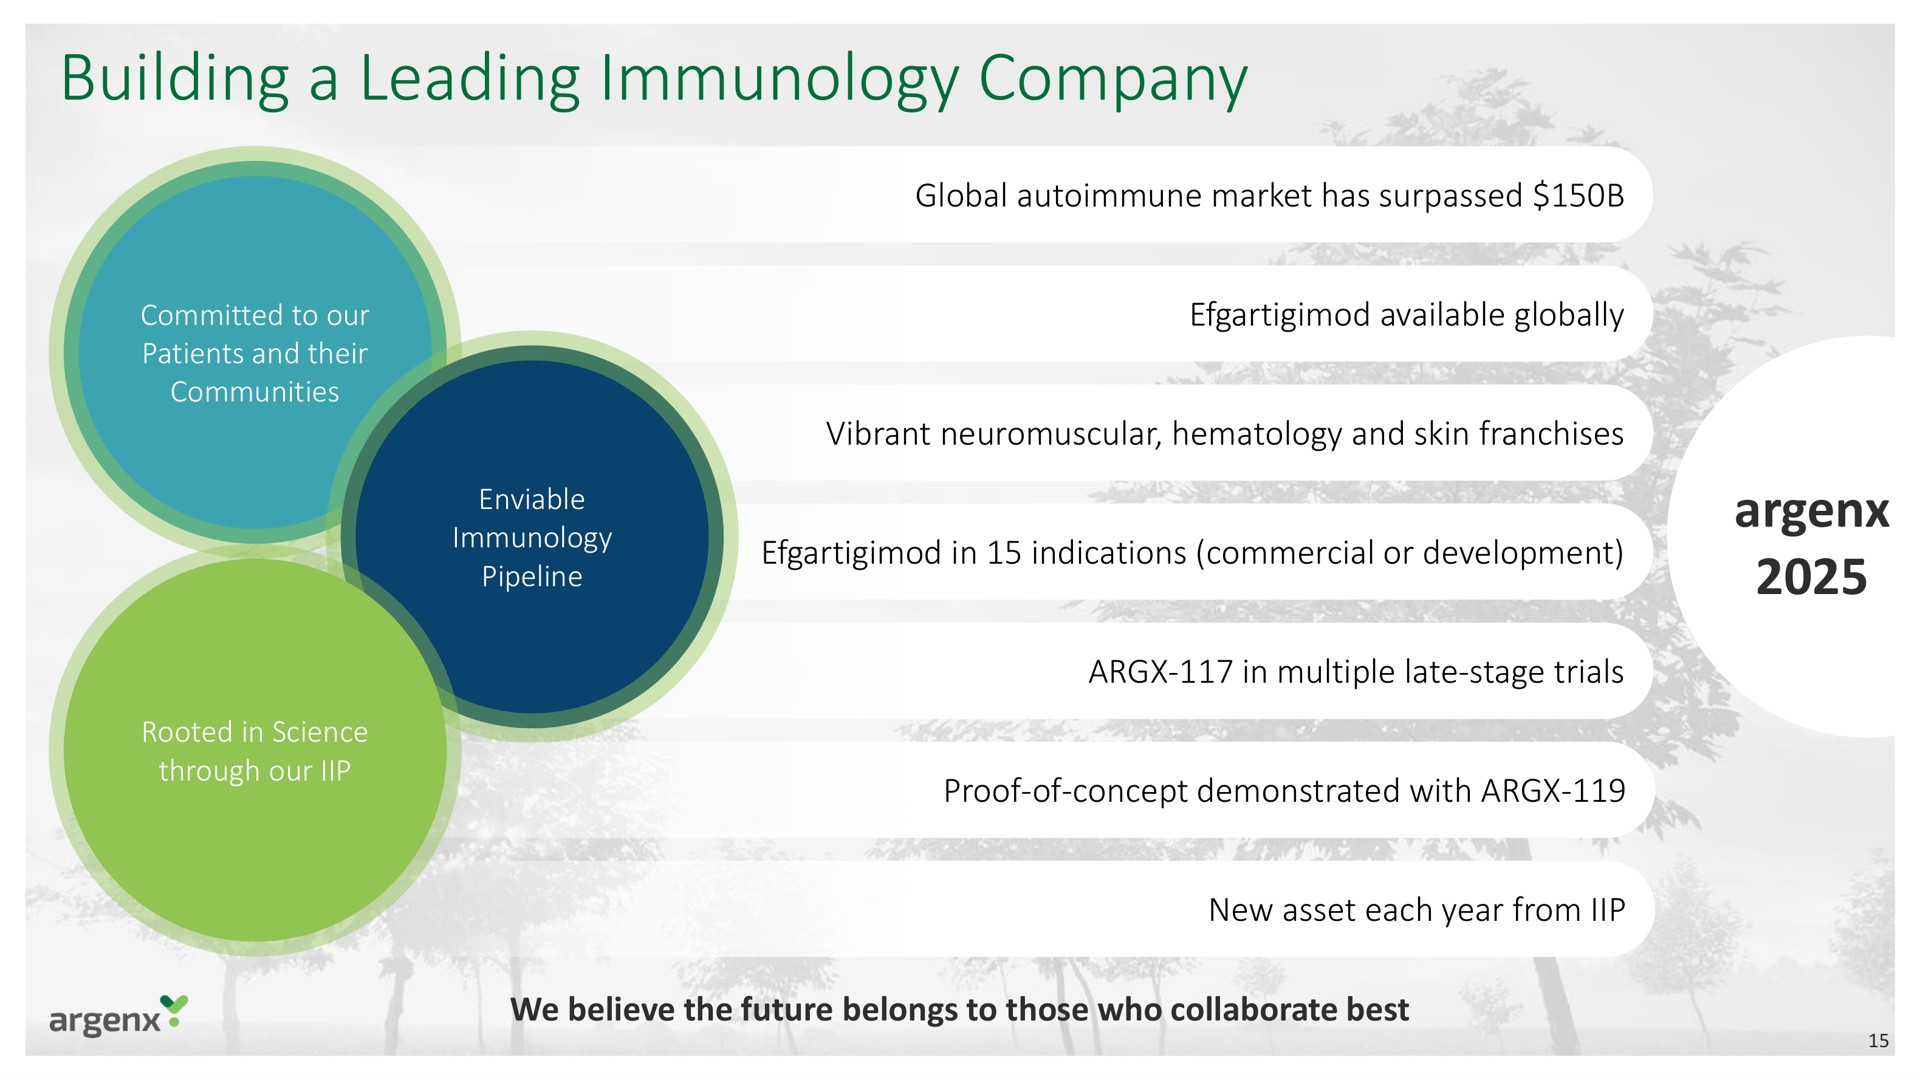 building a leading immunology company | argenx SE